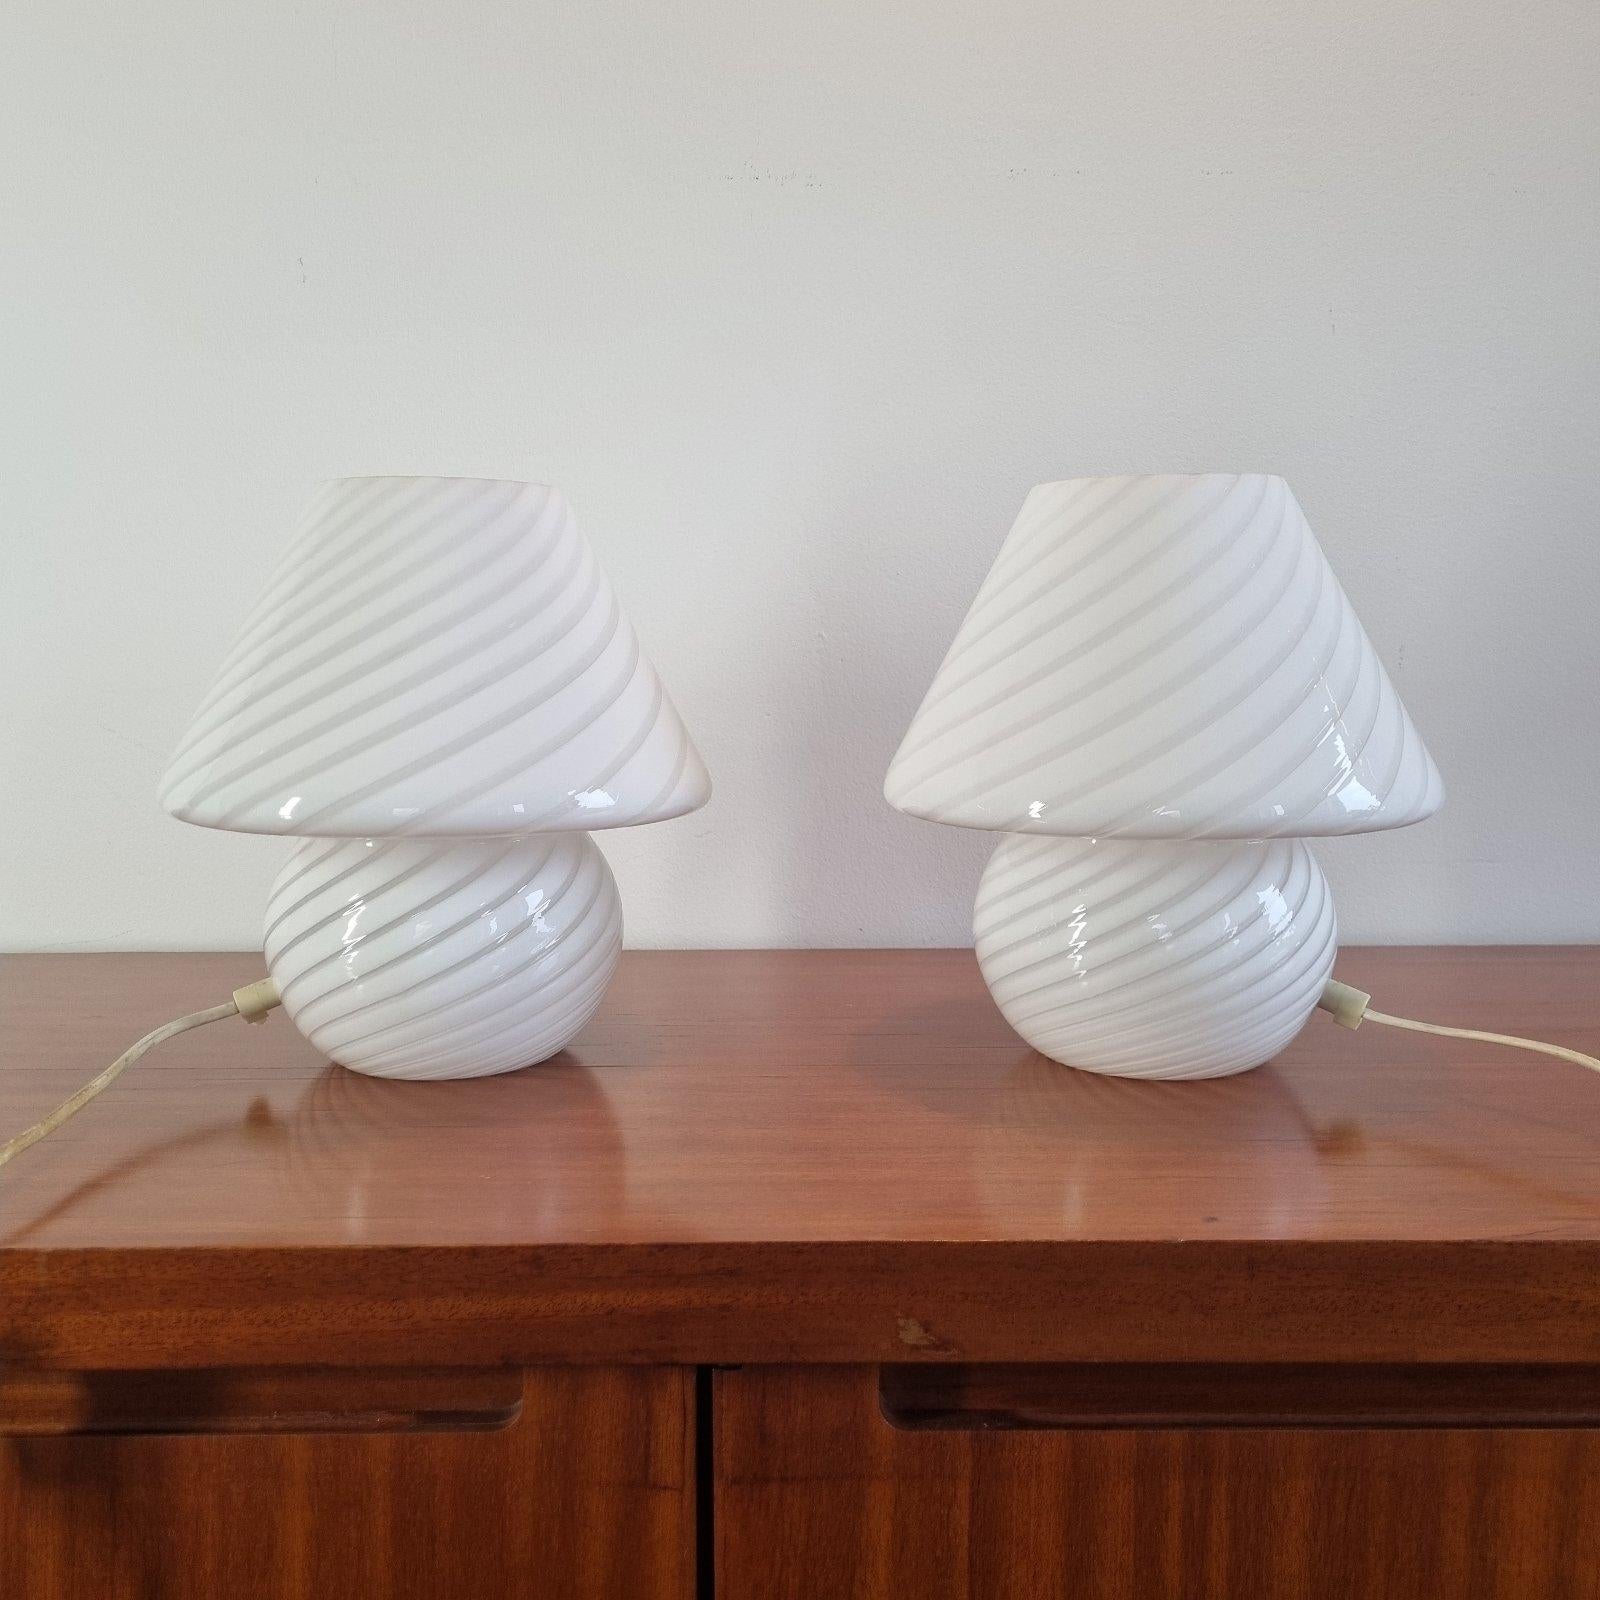 Italian Pair of Large Murano Glass Swirl Table Lamps, Attributed to Venini, Italy 70s For Sale